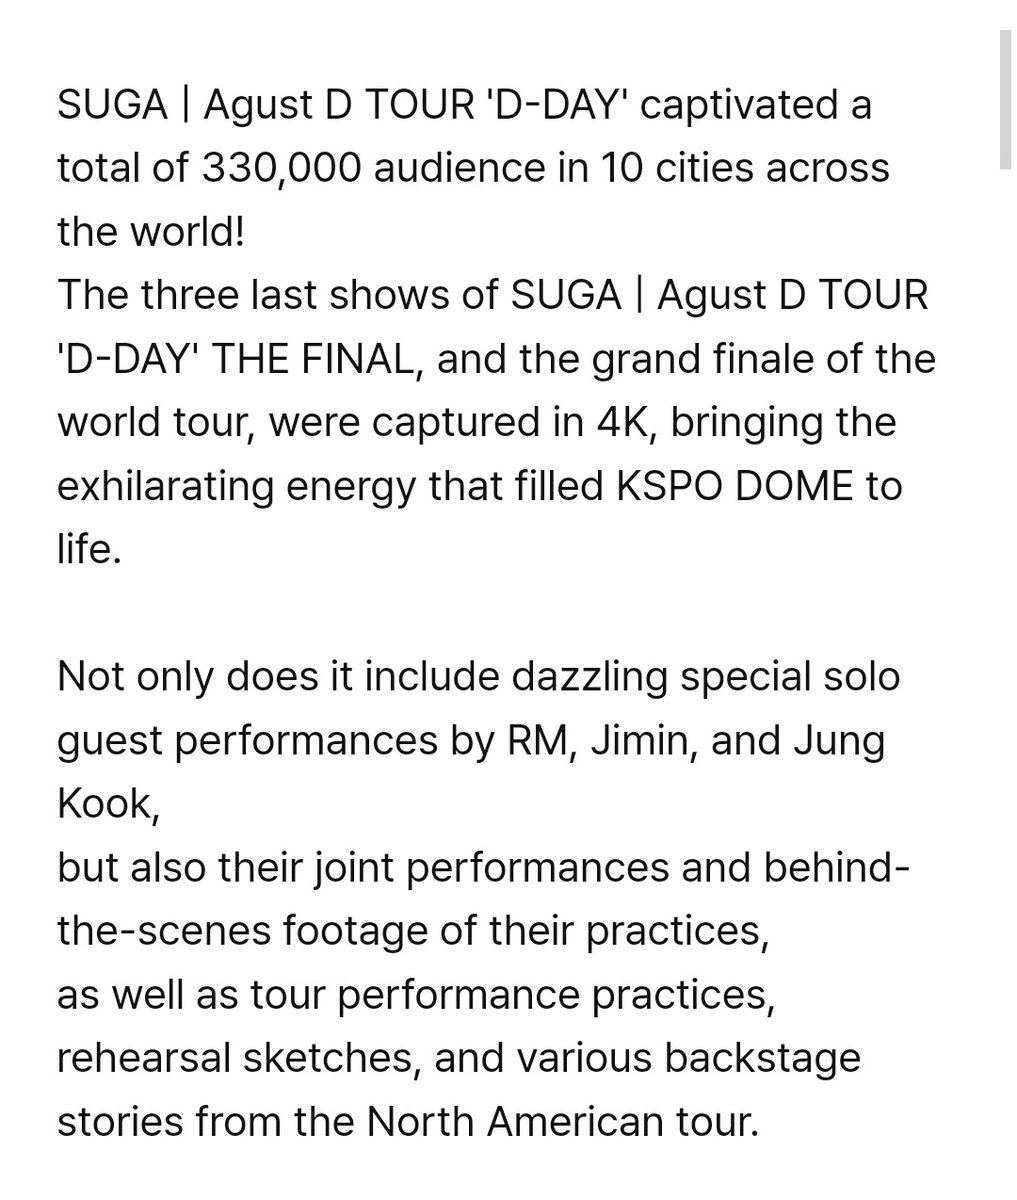 Not only does it include dazzling special solo guest performances by RM, Jimin, and Jung Kook, but also their joint performances and behind-the-scenes footage of their practices, as well as tour performance practices, rehearsal sketches, and various backstage stories from the